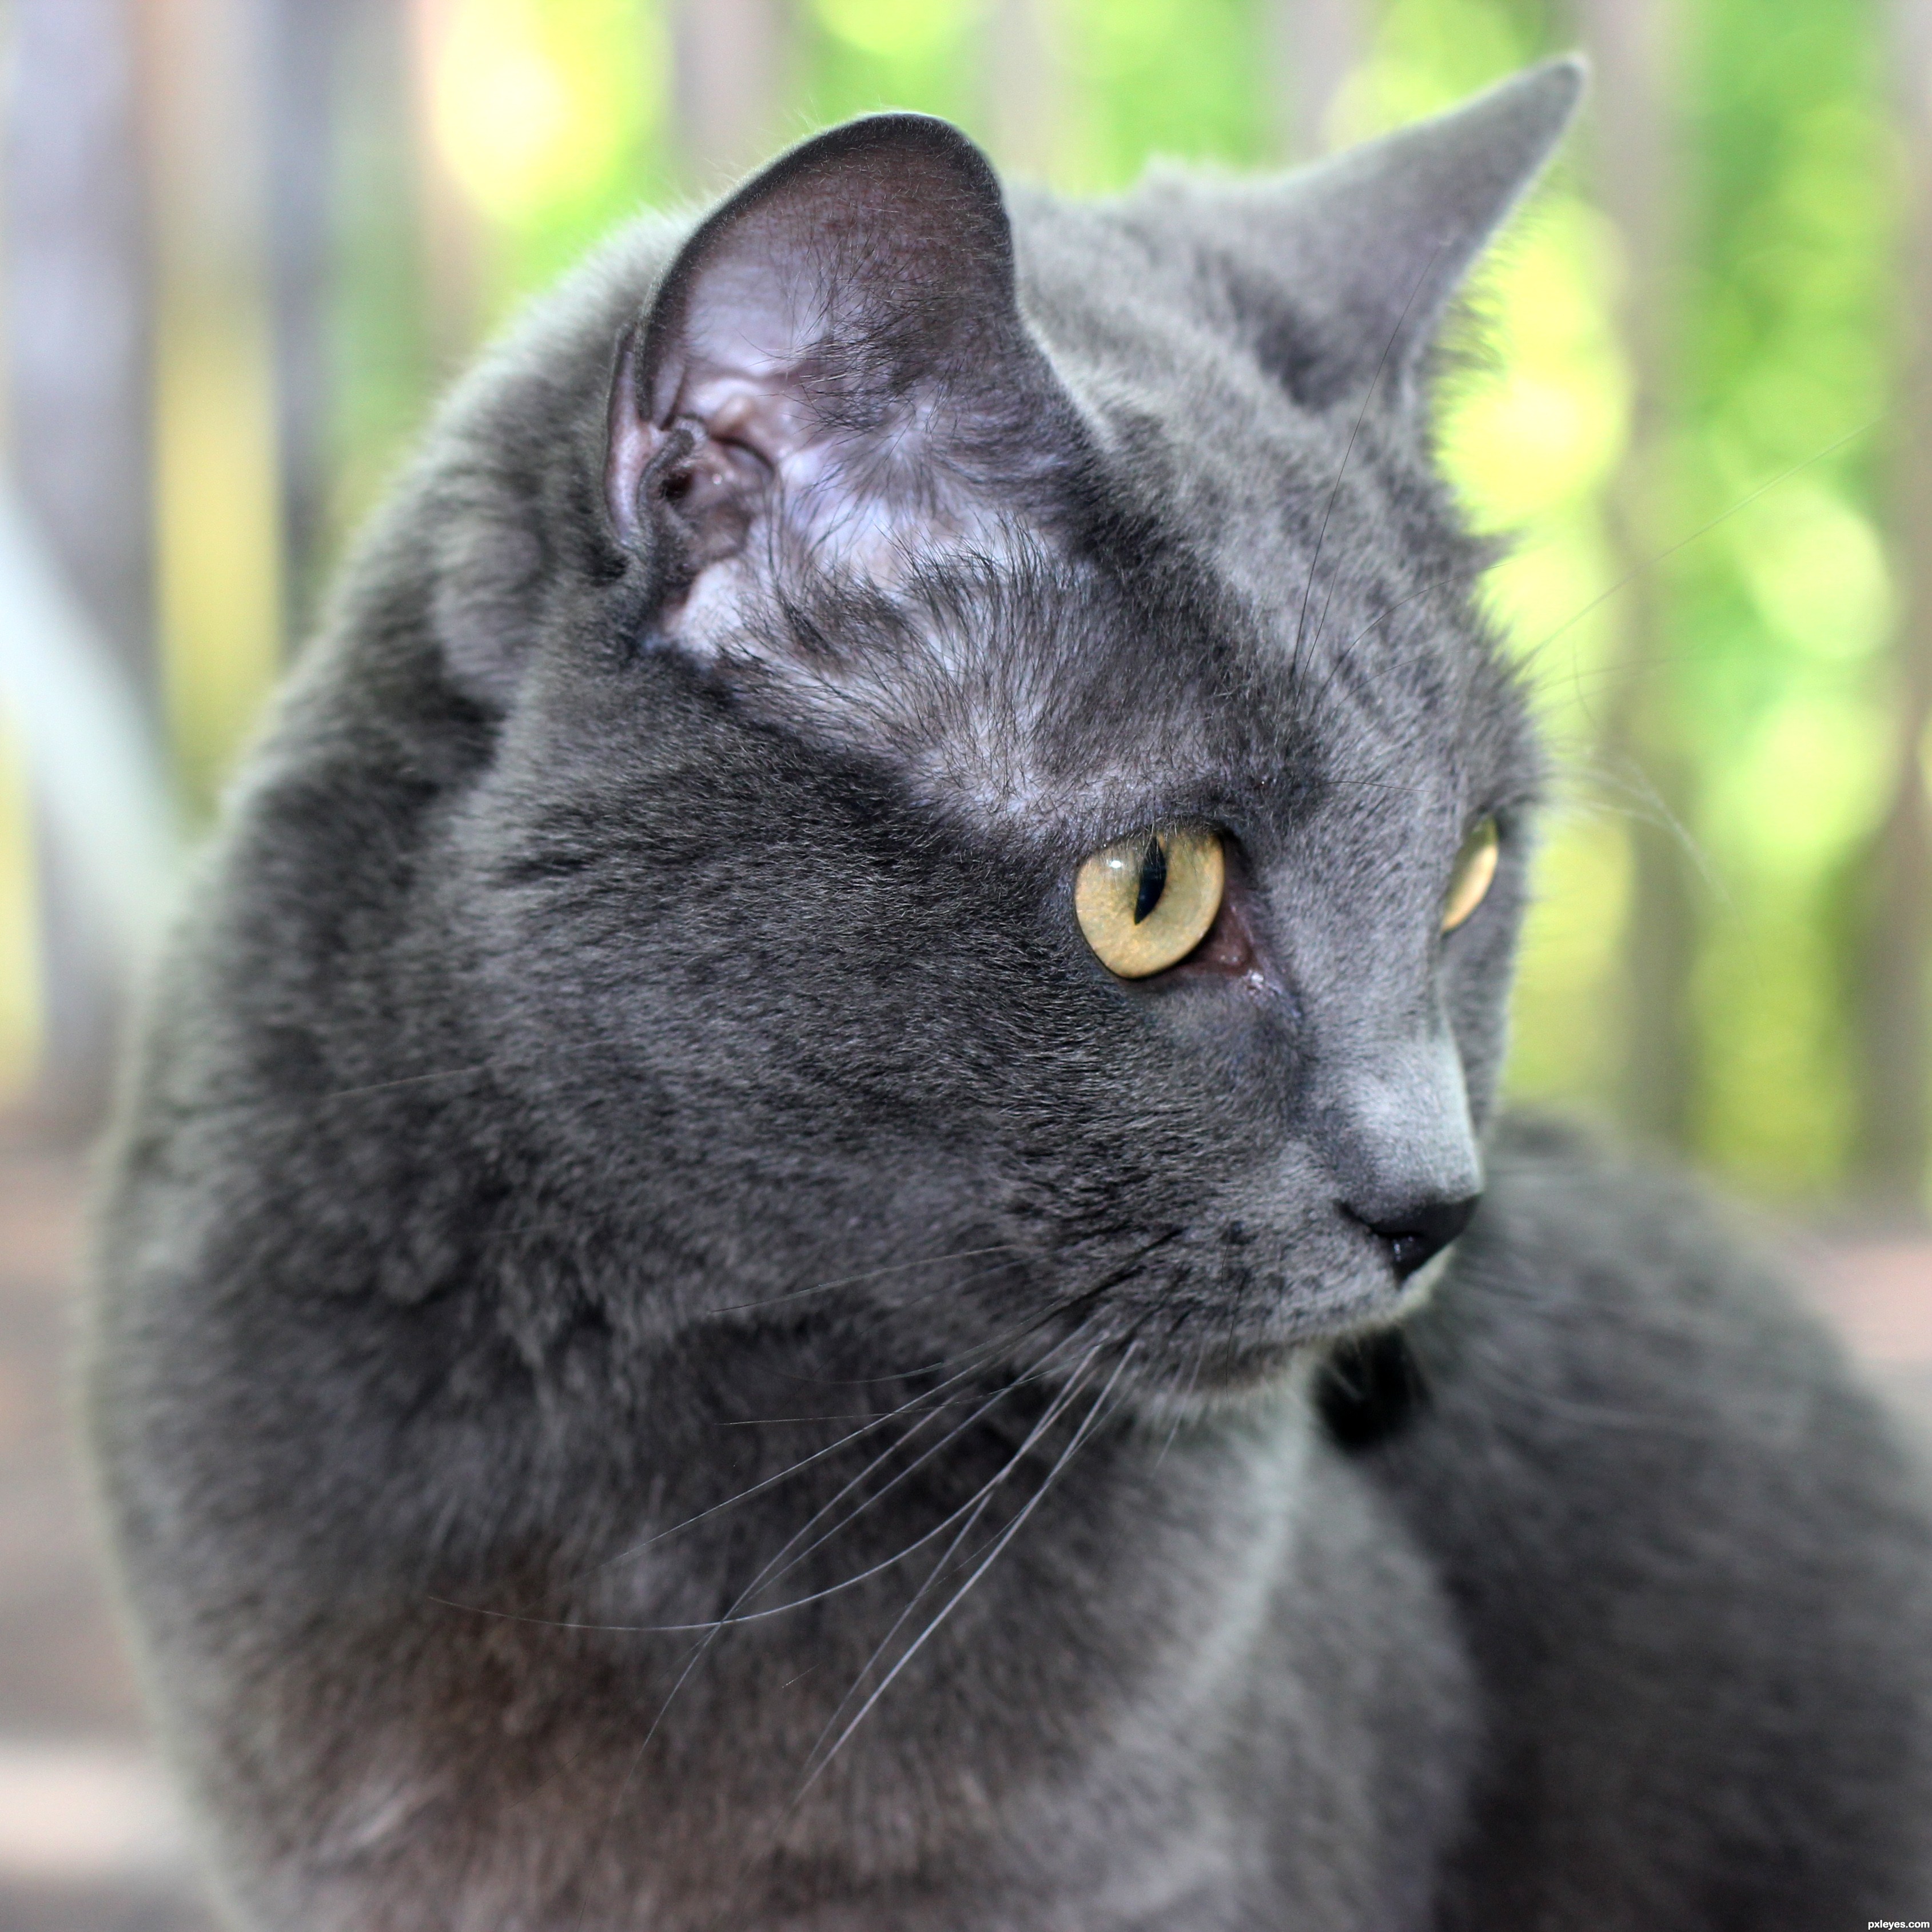 Grey Cat picture, by jbillitteri for: cats 3 photography contest